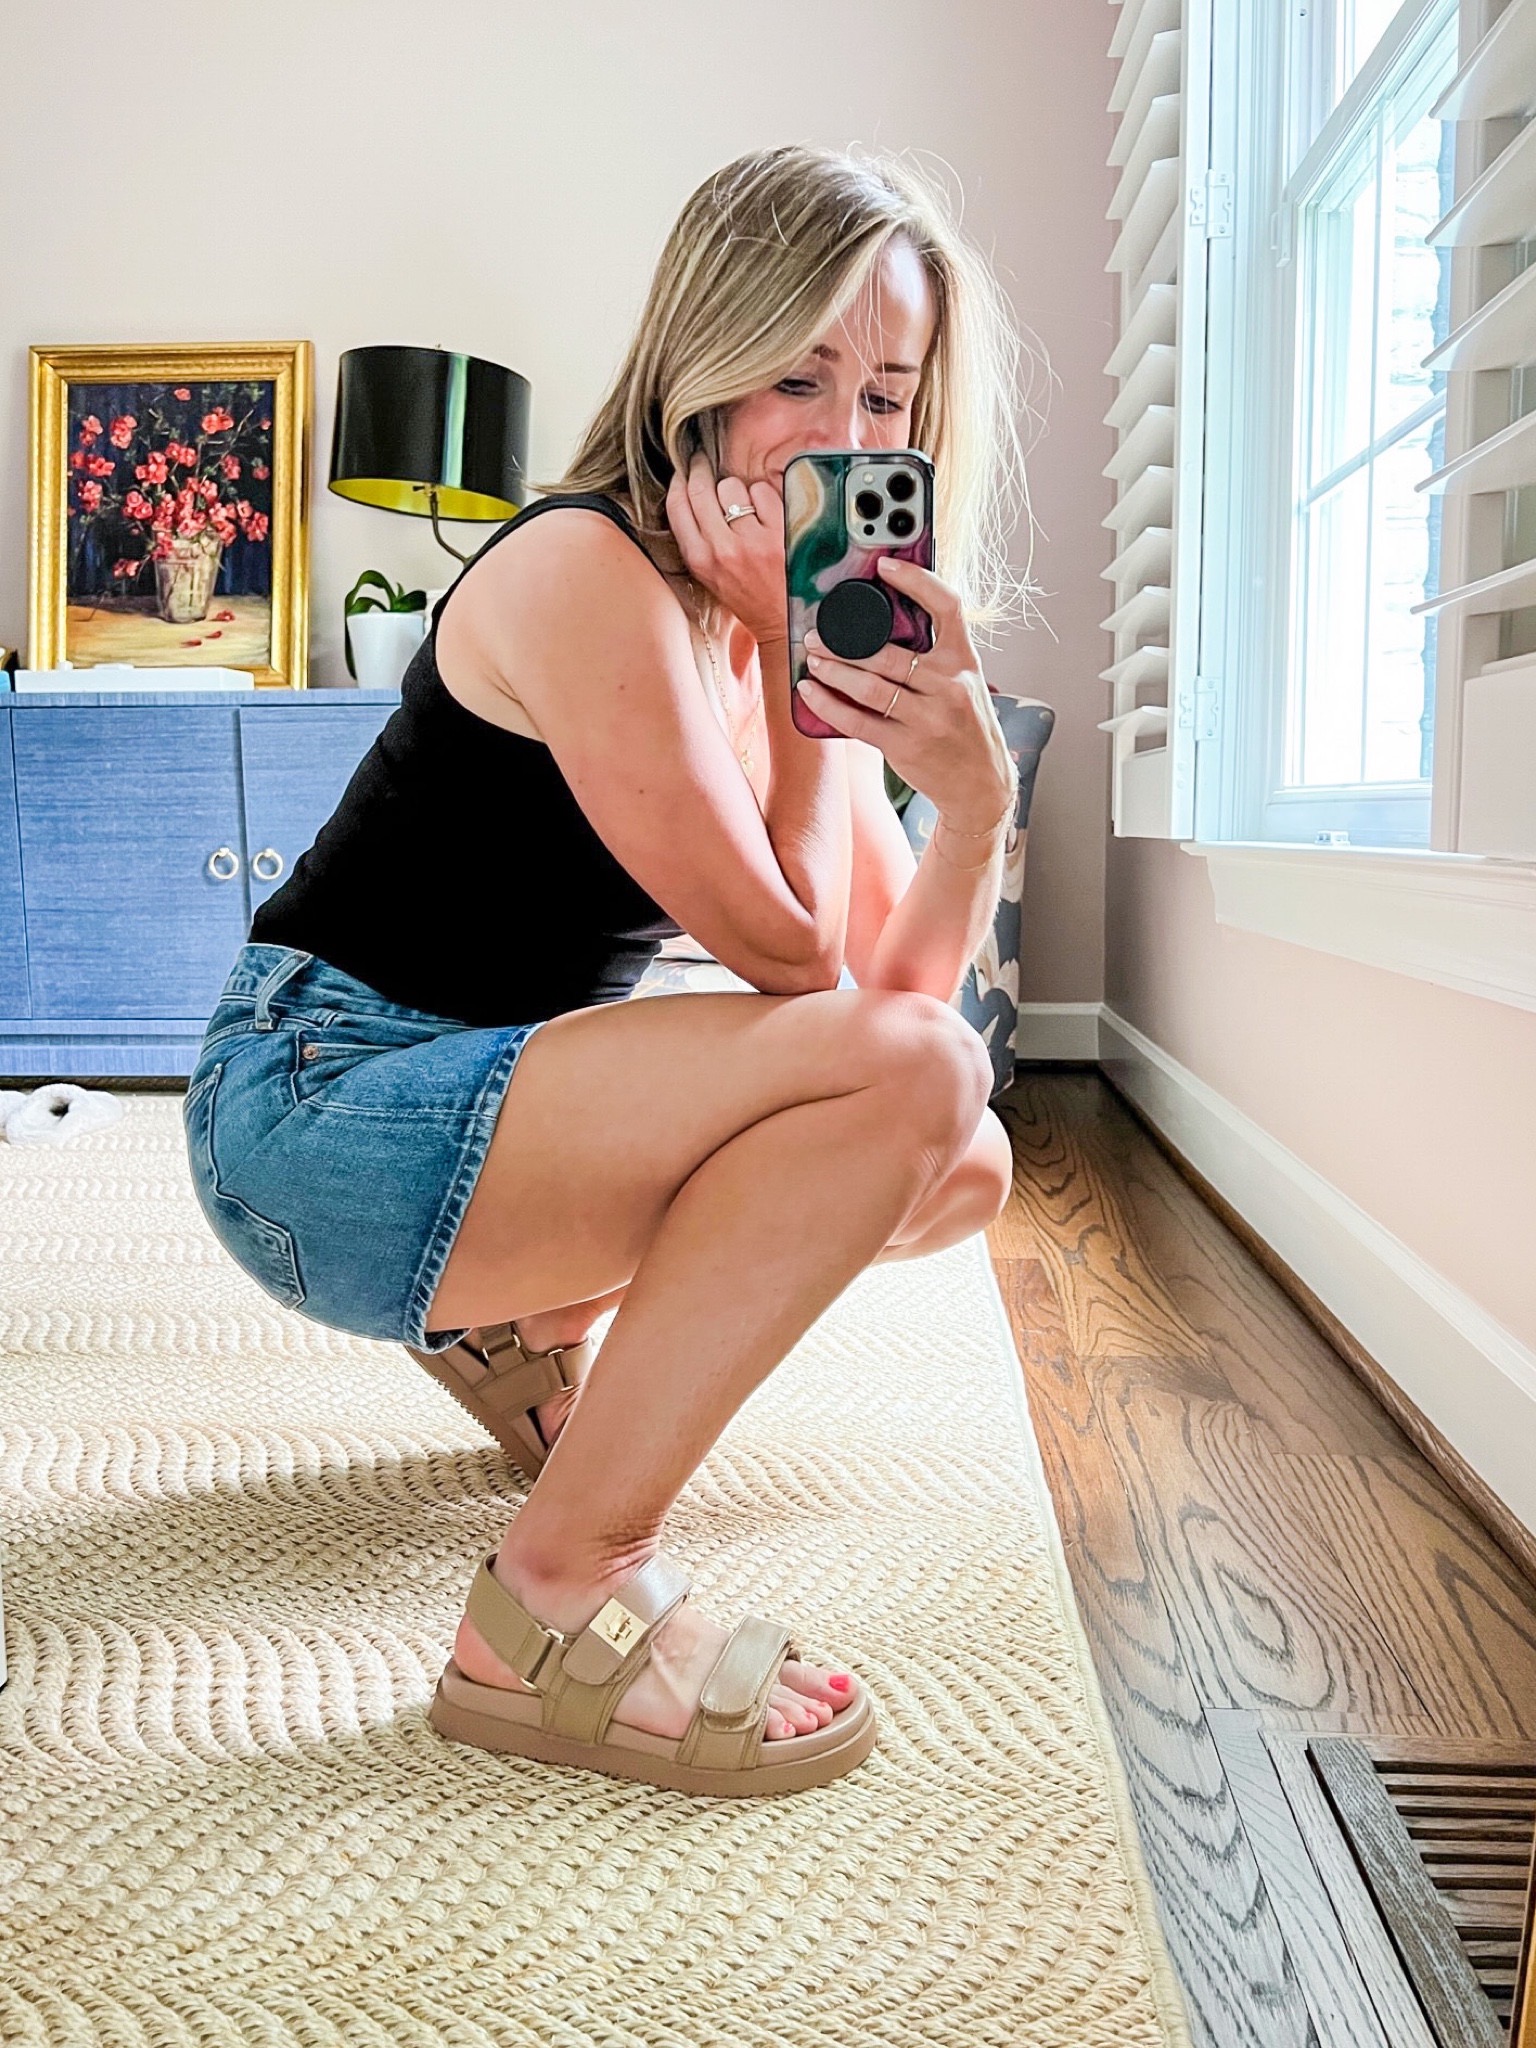 Neutral Sandals for Summer: Should be New, Timeless, & Comfy